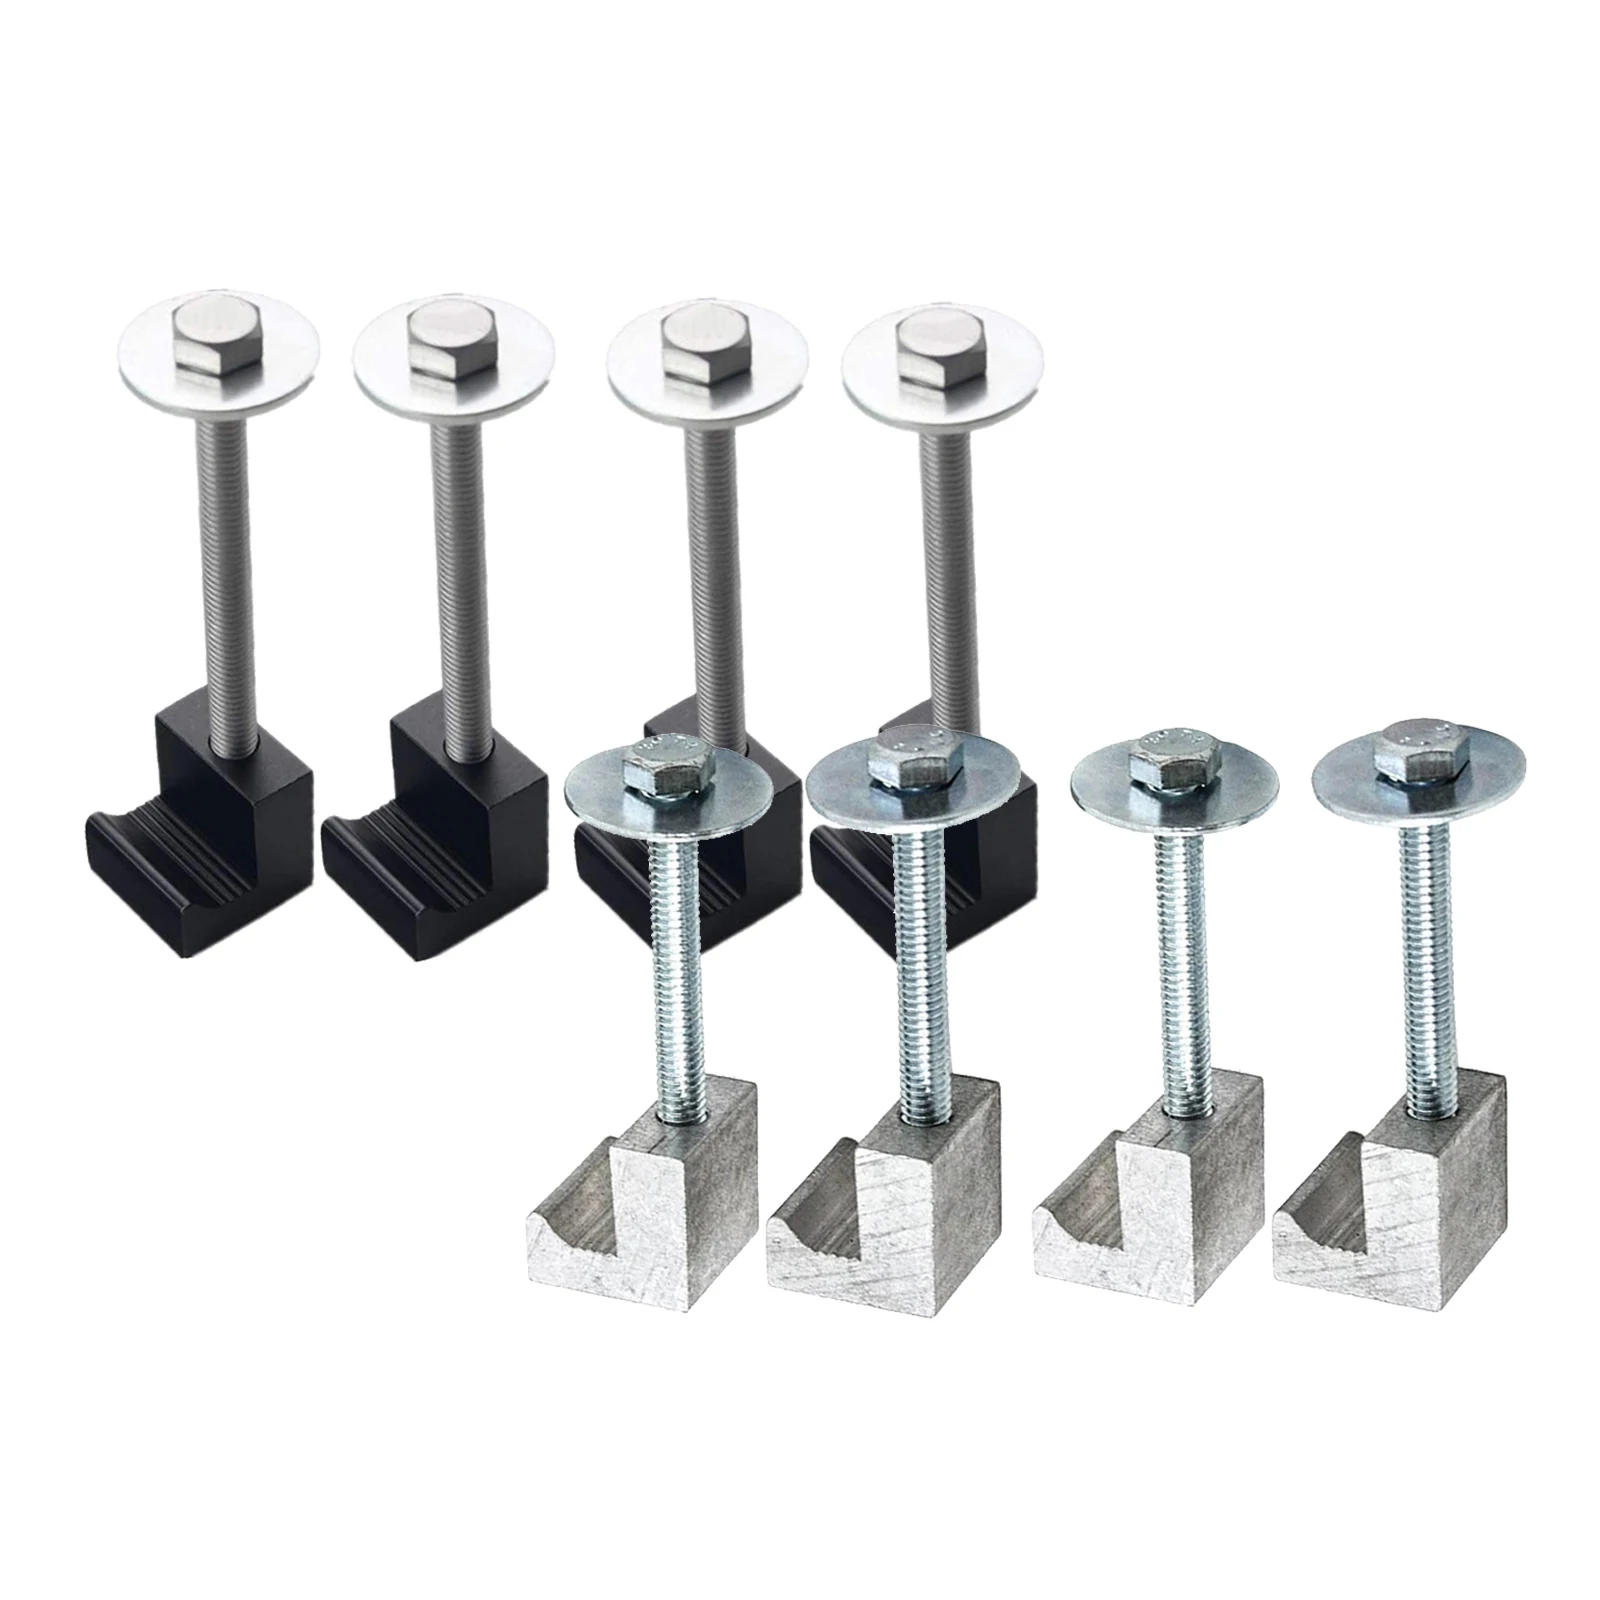 4PCS Mounting Clamps Truck Accessories Tool Box Tie Downs Holder Durable J Hook Crossover Mount Aluminum Alloy Pickup Fixing